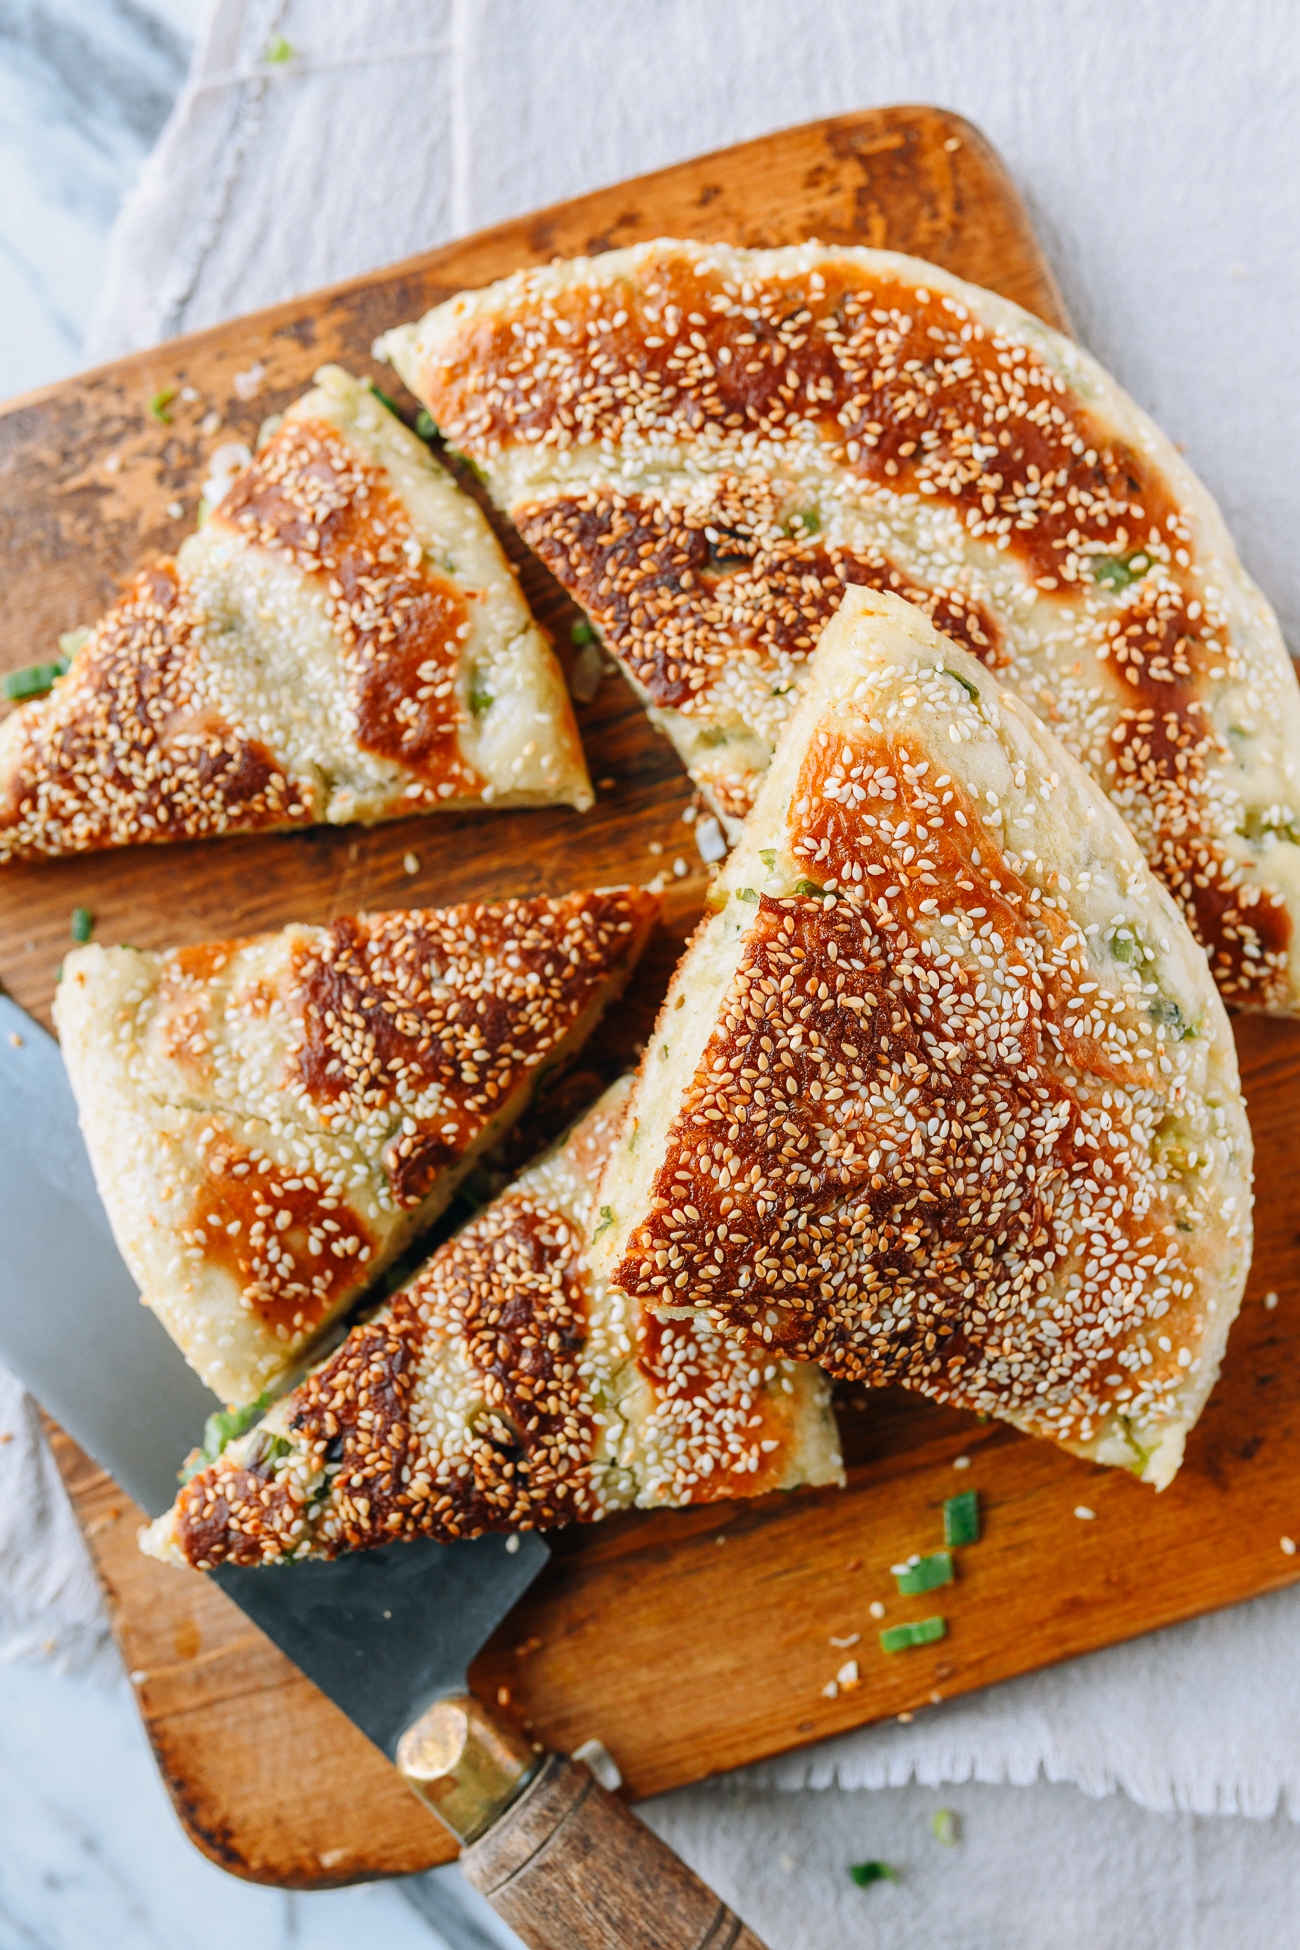 Shanghai Flatbread with Sesame Seeds and Scallions